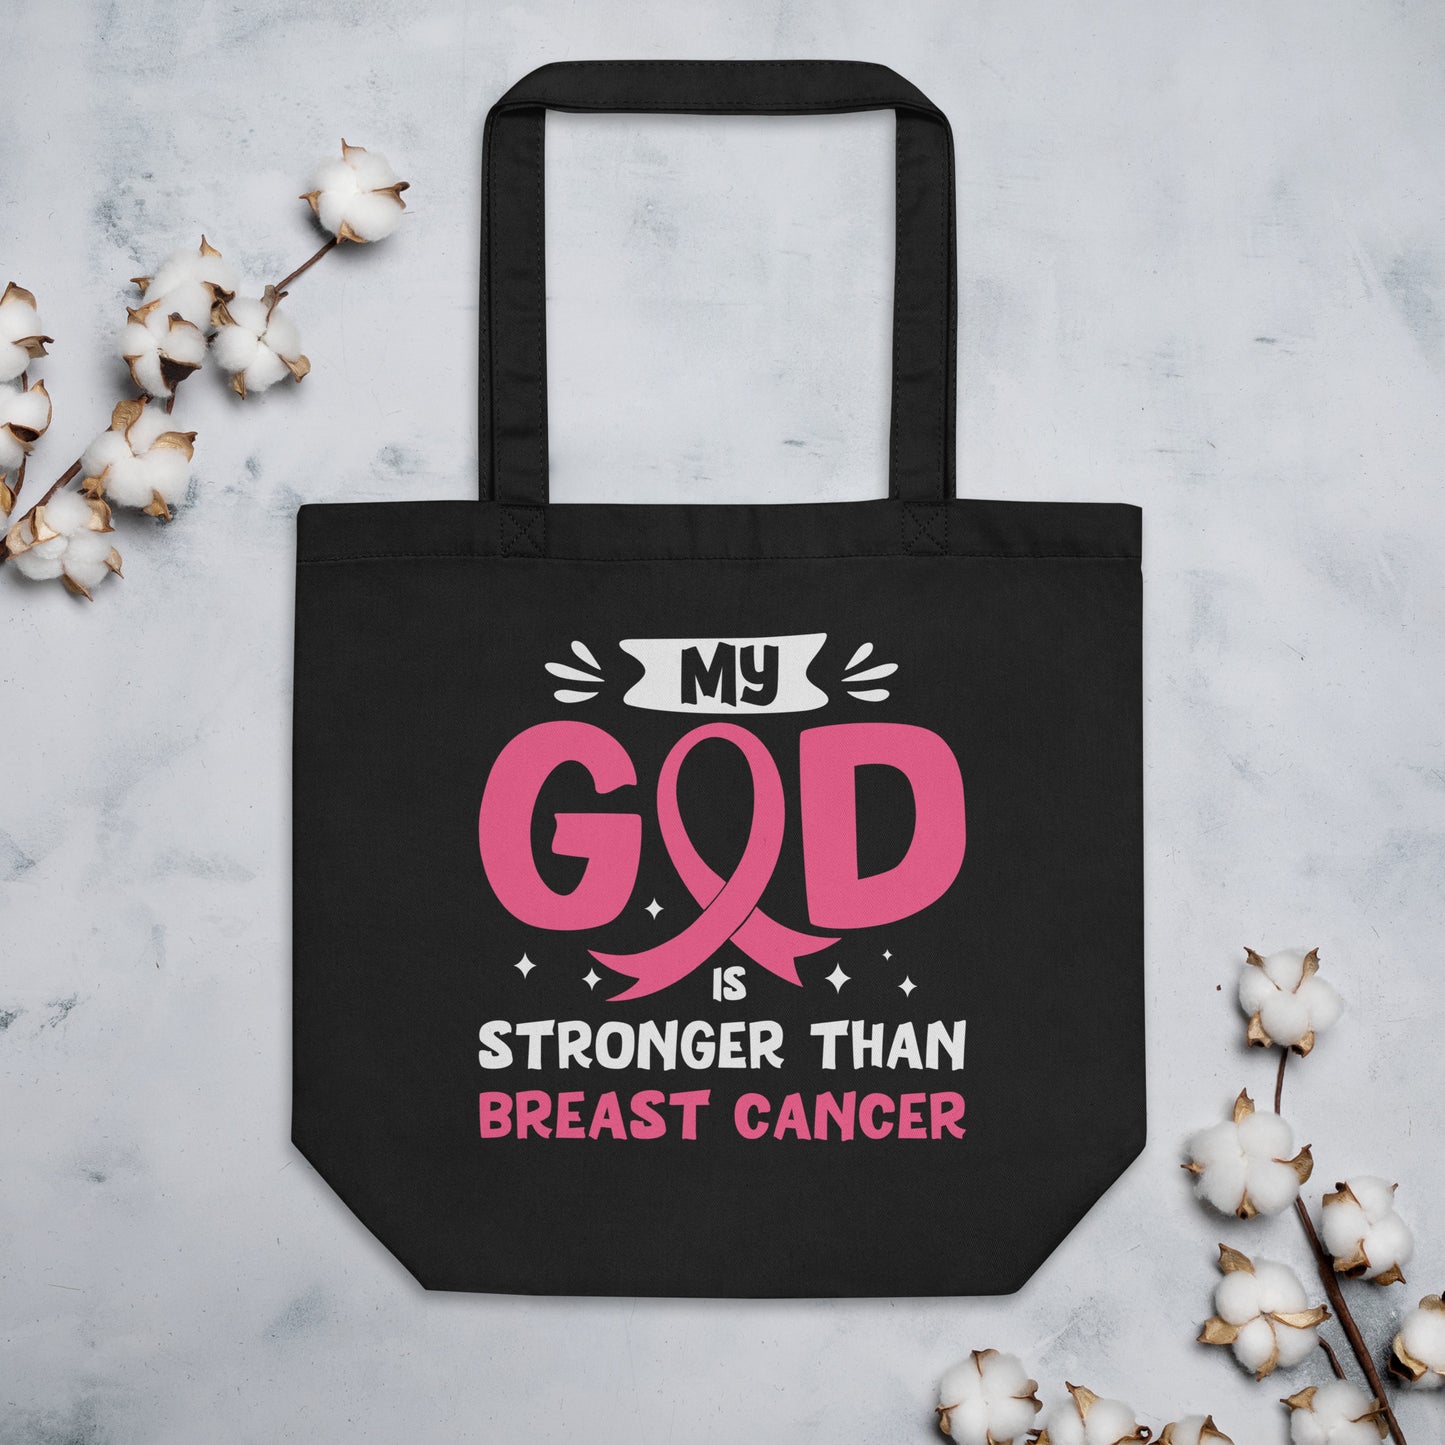 God is Stronger Than Breast Cancer Eco Tote Bag